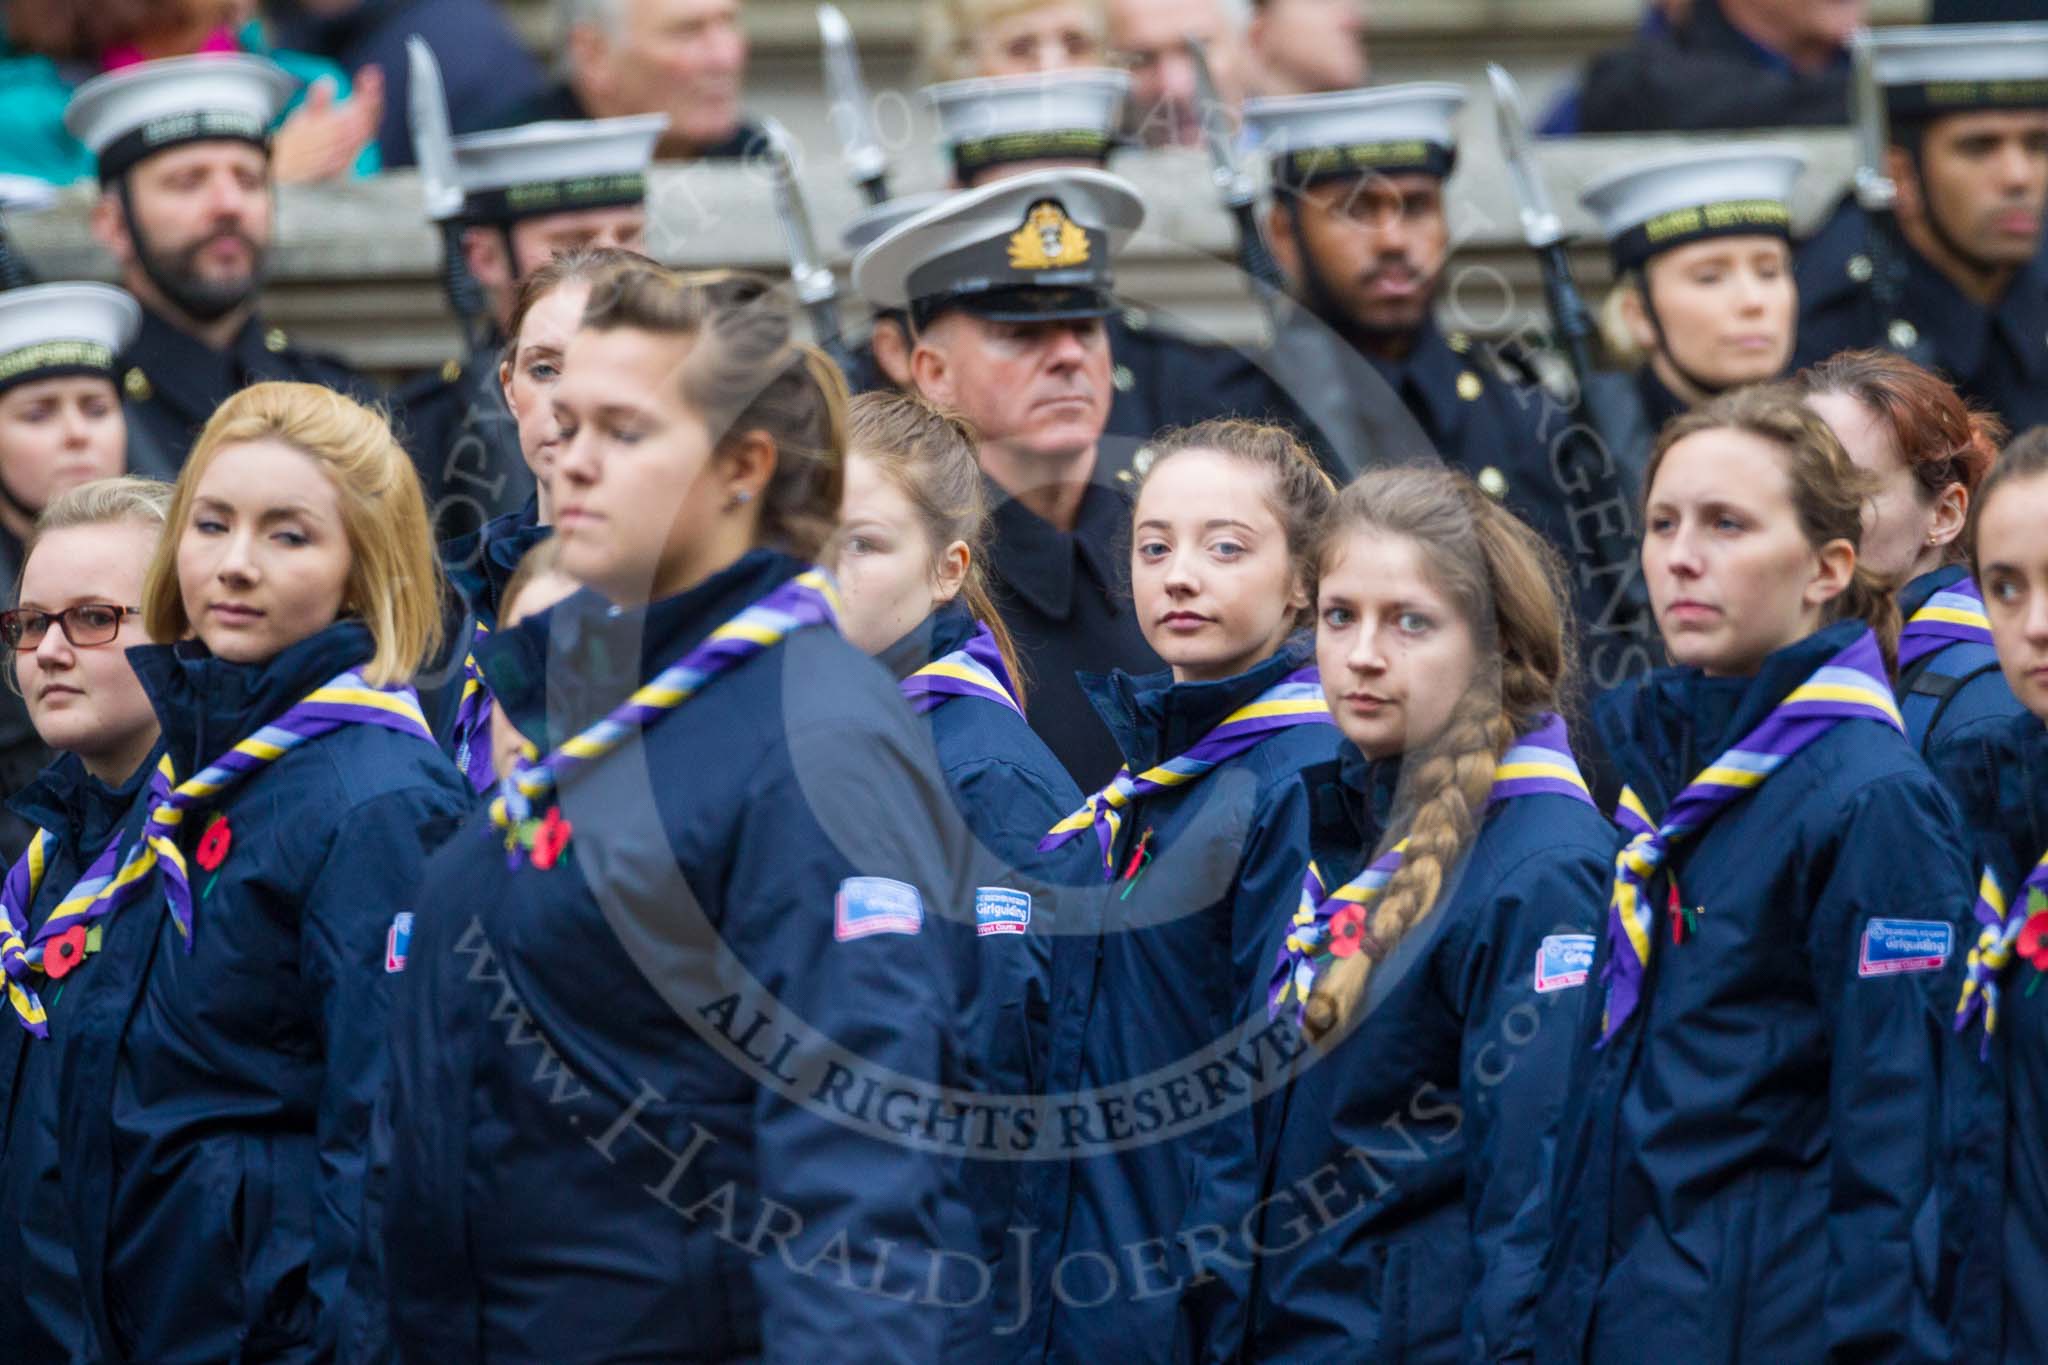 Remembrance Sunday at the Cenotaph 2015: Group M51, Girlguiding London & South East England.
Cenotaph, Whitehall, London SW1,
London,
Greater London,
United Kingdom,
on 08 November 2015 at 12:21, image #1732